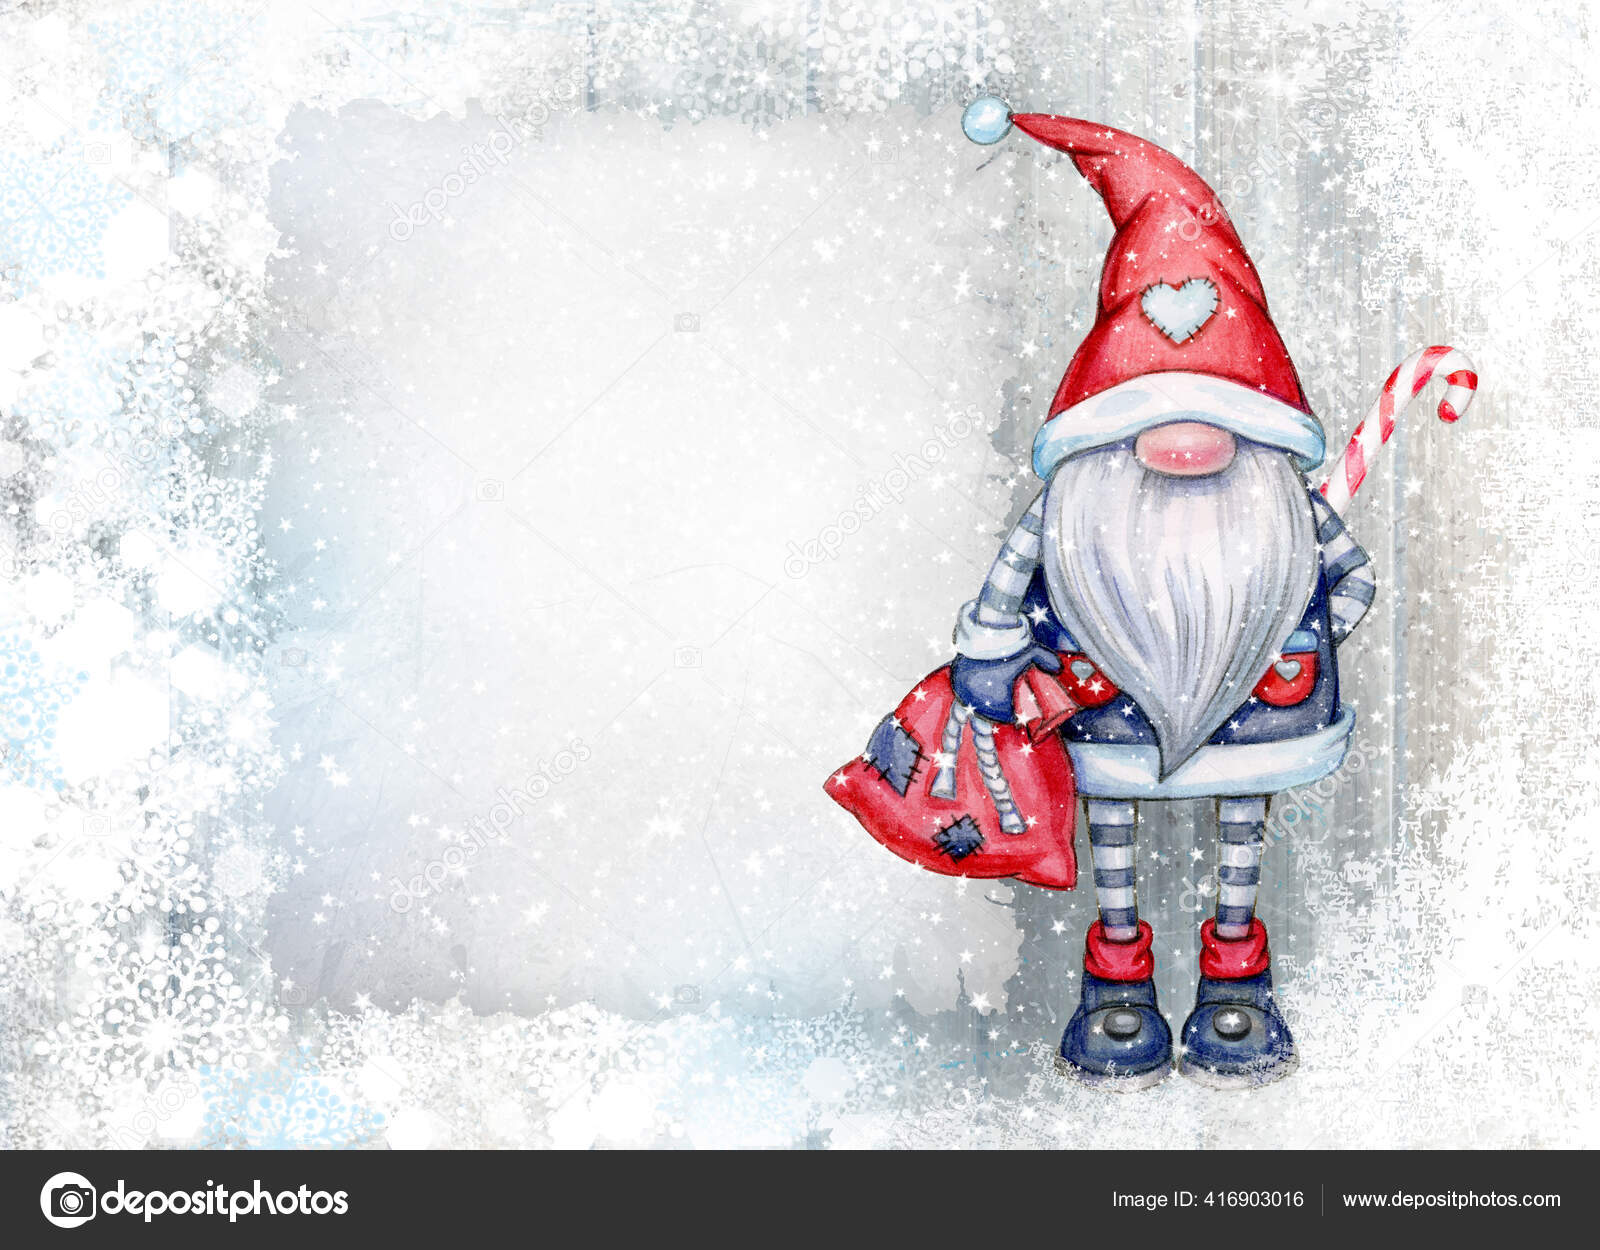 12300 Christmas Gnome Stock Photos Pictures  RoyaltyFree Images   iStock  Merry christmas gnome Christmas gnome vector